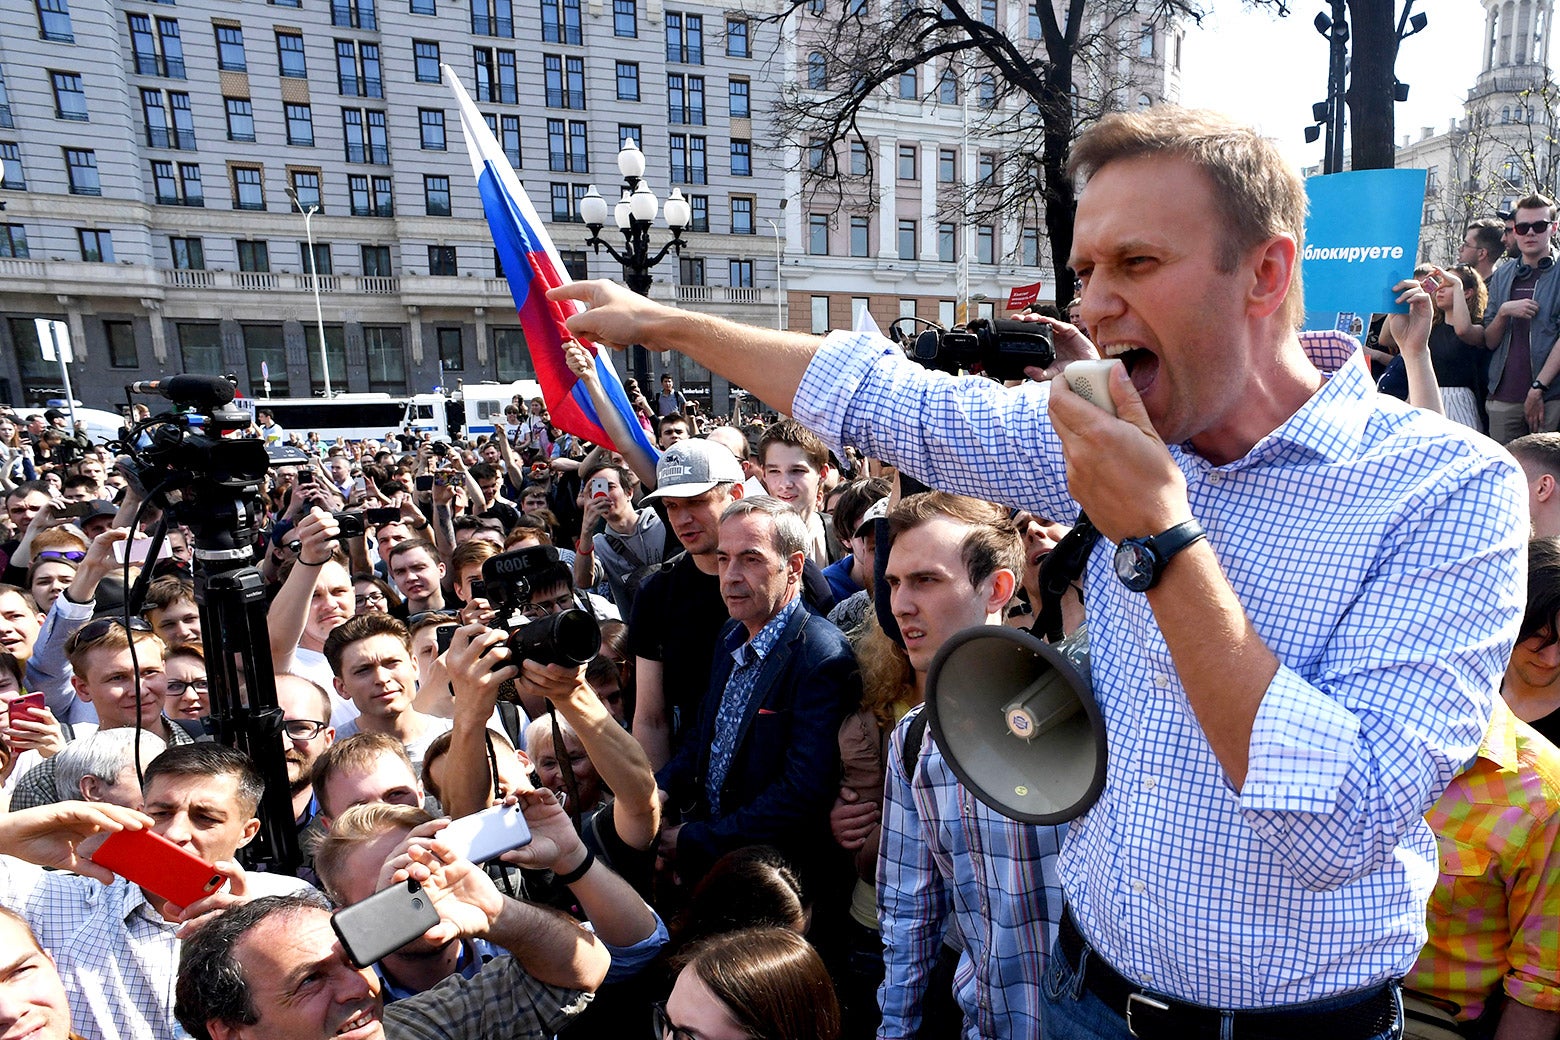 Navalny speaks into a speaker, attached to a megaphone, and points, to a crowd of protesters, a Russian flag hoisted in the crowd.